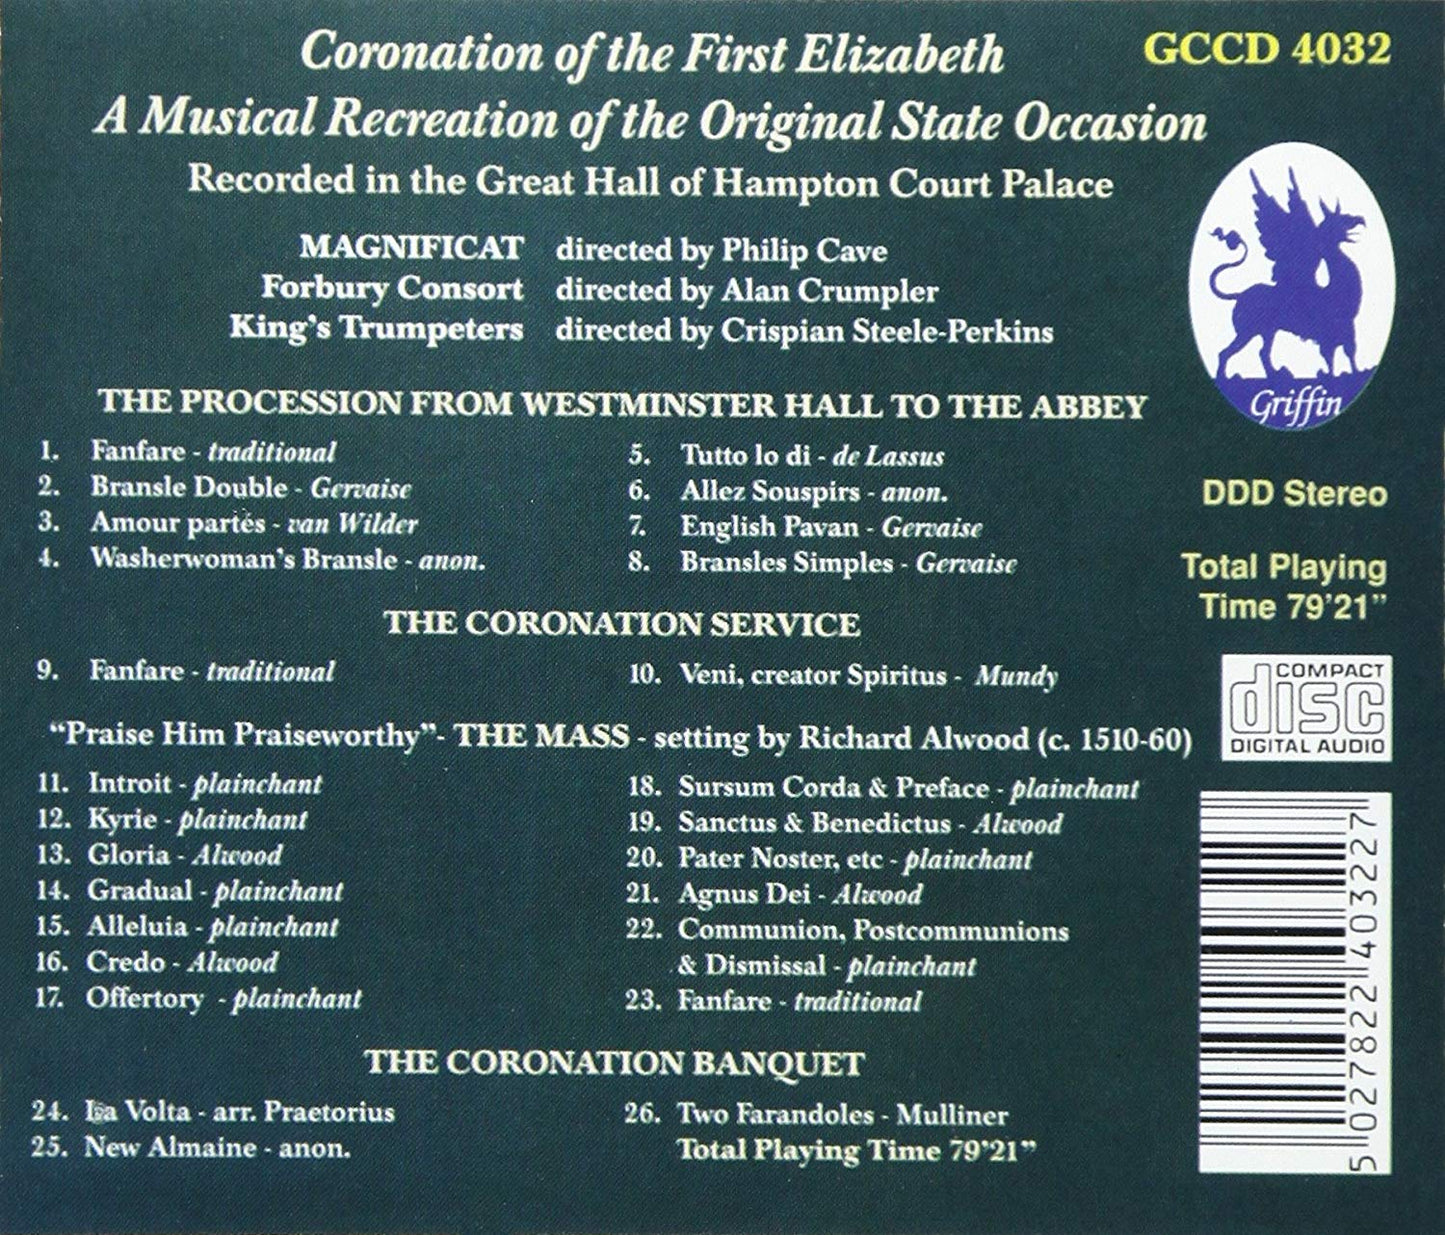 CORONATION OF THE FIRST ELIZABETH (CAVE'S MAGNIFICAT) - FORBURY CONSORT, STEELE-PERKINS, KING'S TRUMPETERS